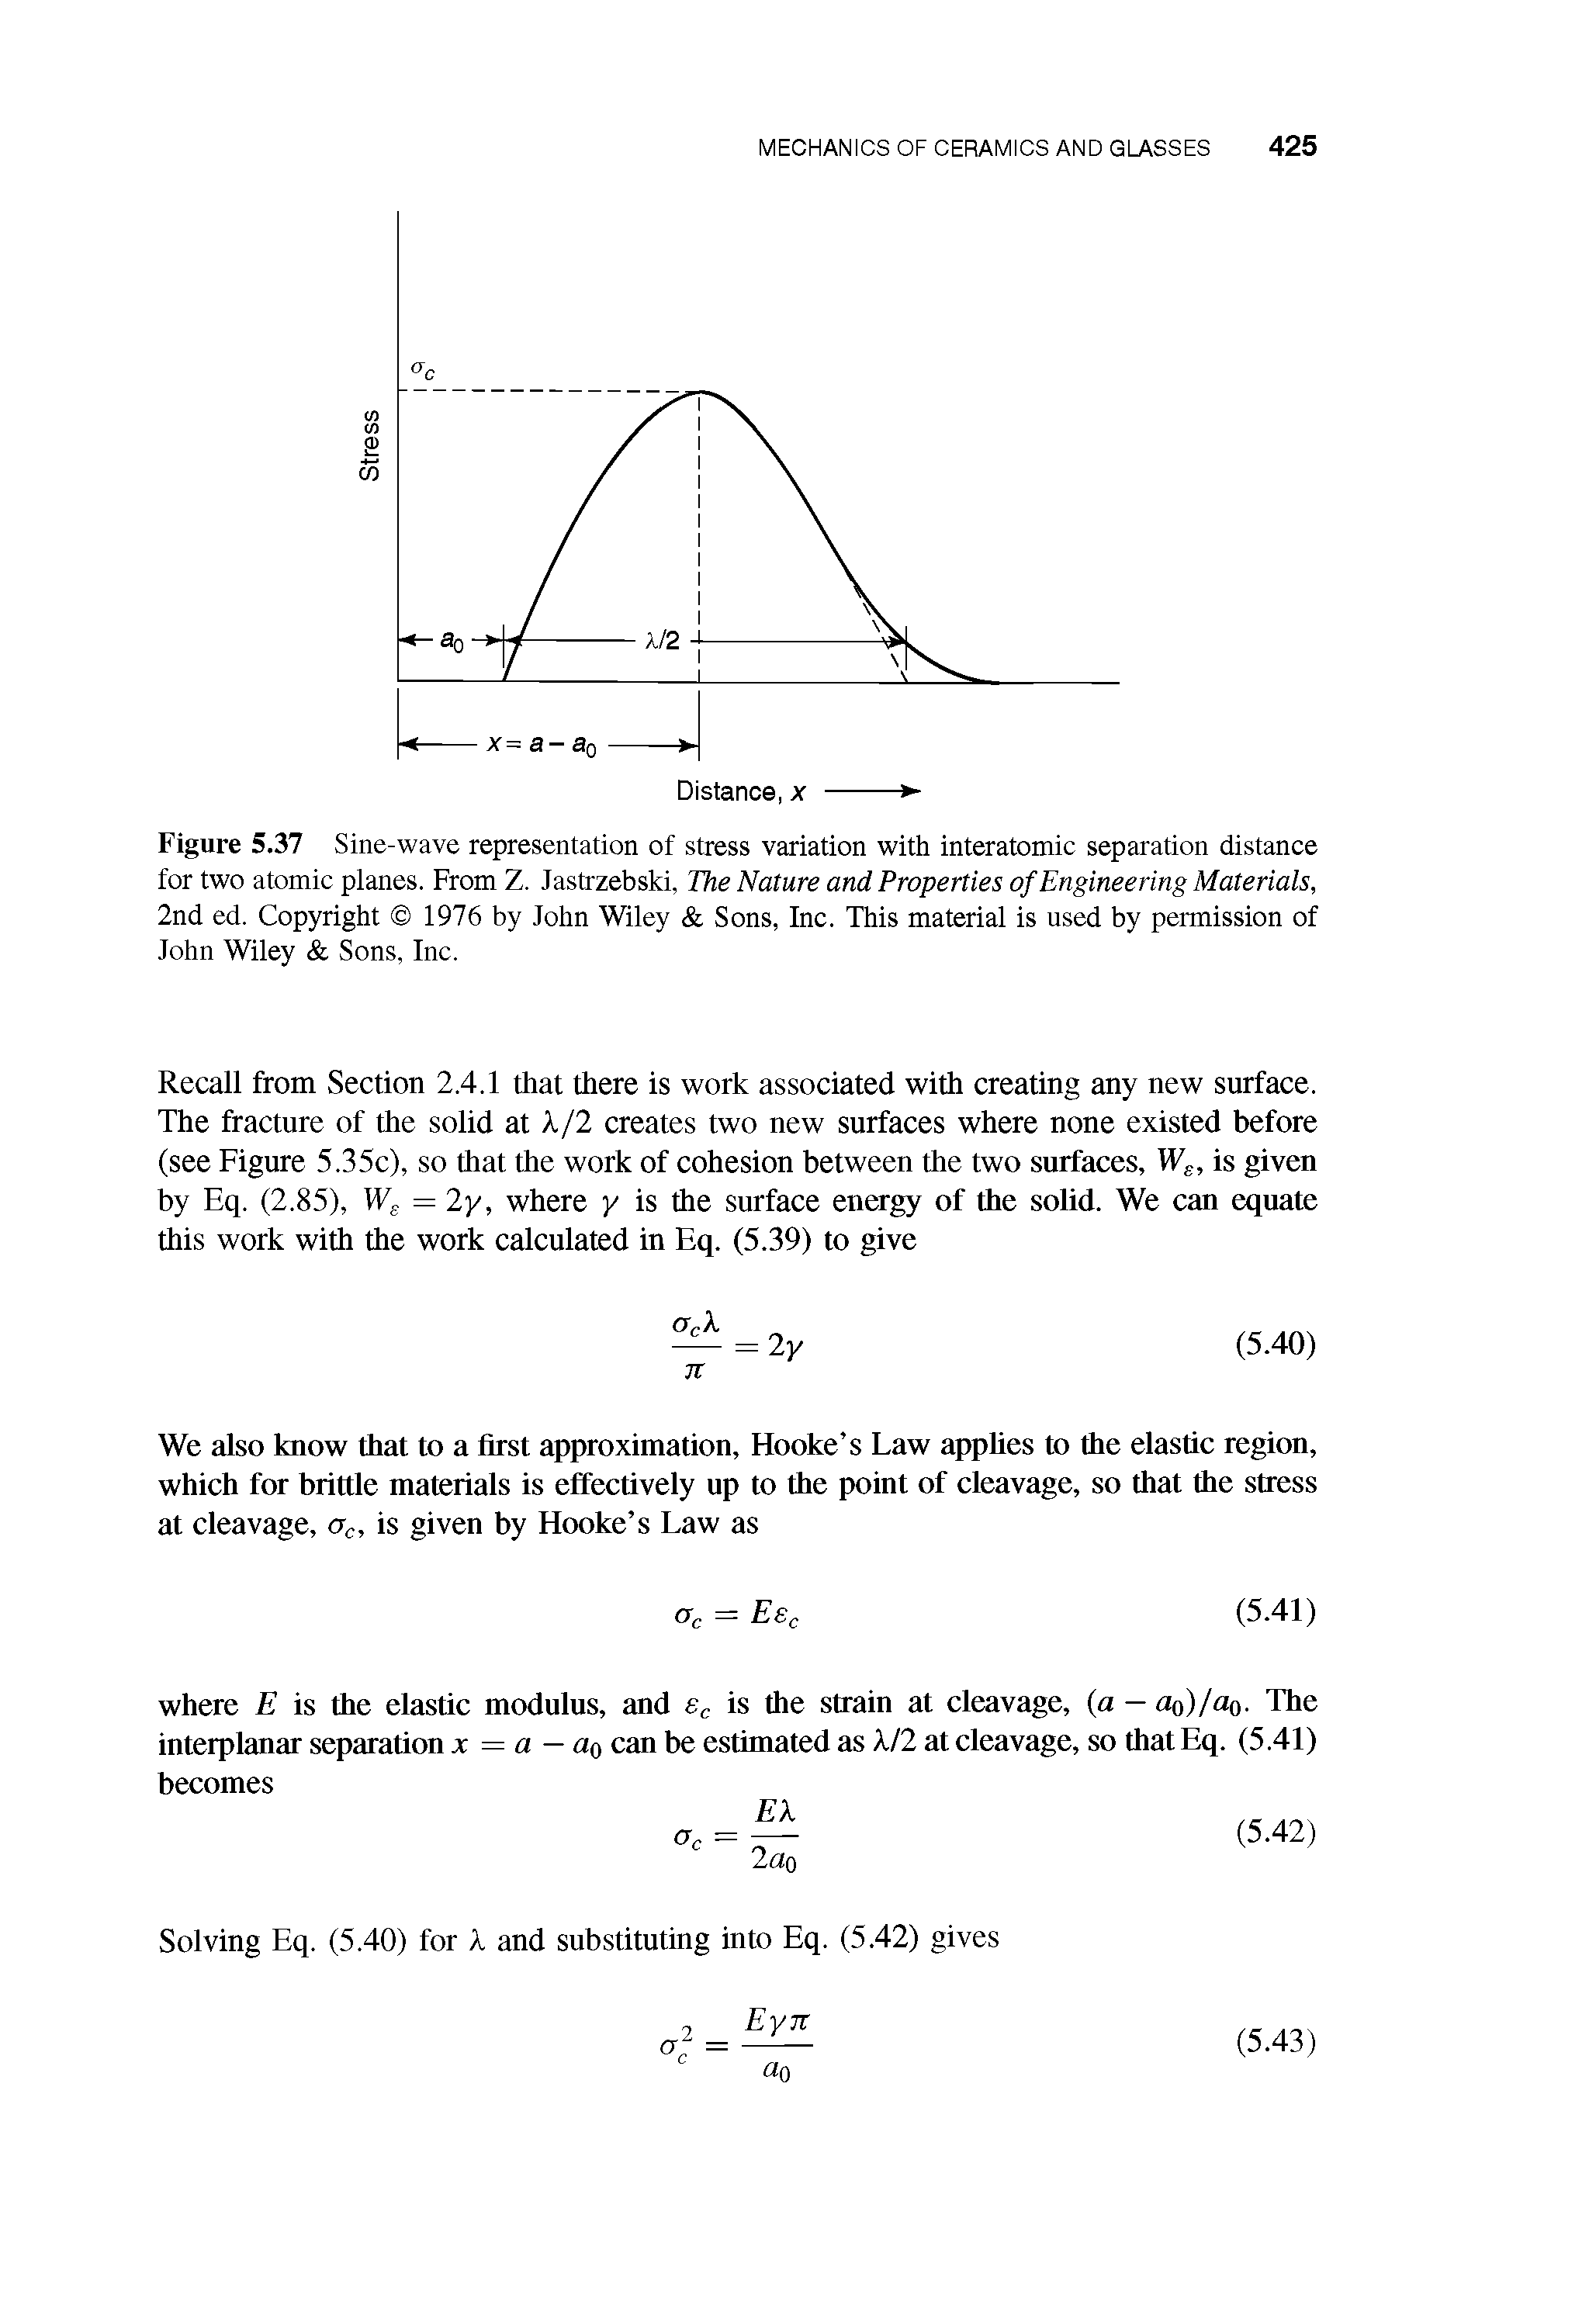 Figure 5.37 Sine-wave representation of stress variation with interatomic separation distance for two atomic planes. From Z. Jastrzebski, The Nature and Properties of Engineering Materials, 2nd ed. Copyright 1976 by John Wiley Sons, Inc. This material is used by permission of John Wiley Sons, Inc.